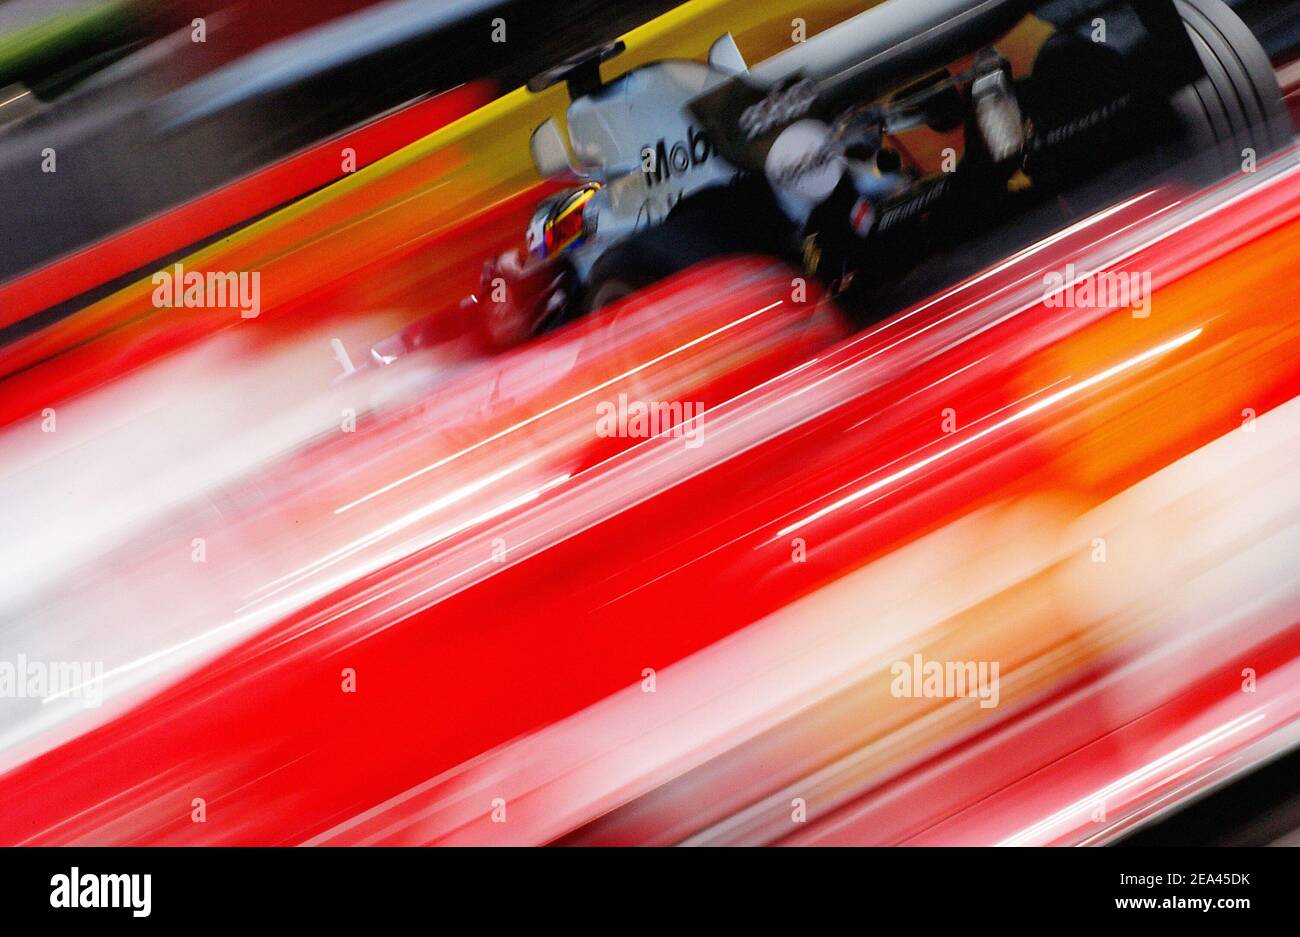 Colombian Formula One driver Juan Pablo Montoya (Team MC-Laren Mercedes) during the Formula one Grand Prix practice session in Monte-Carlo, Monaco, on May 21, 2005. Photo by Thierry Gromik/CAMELEON/ABACA. Stock Photo